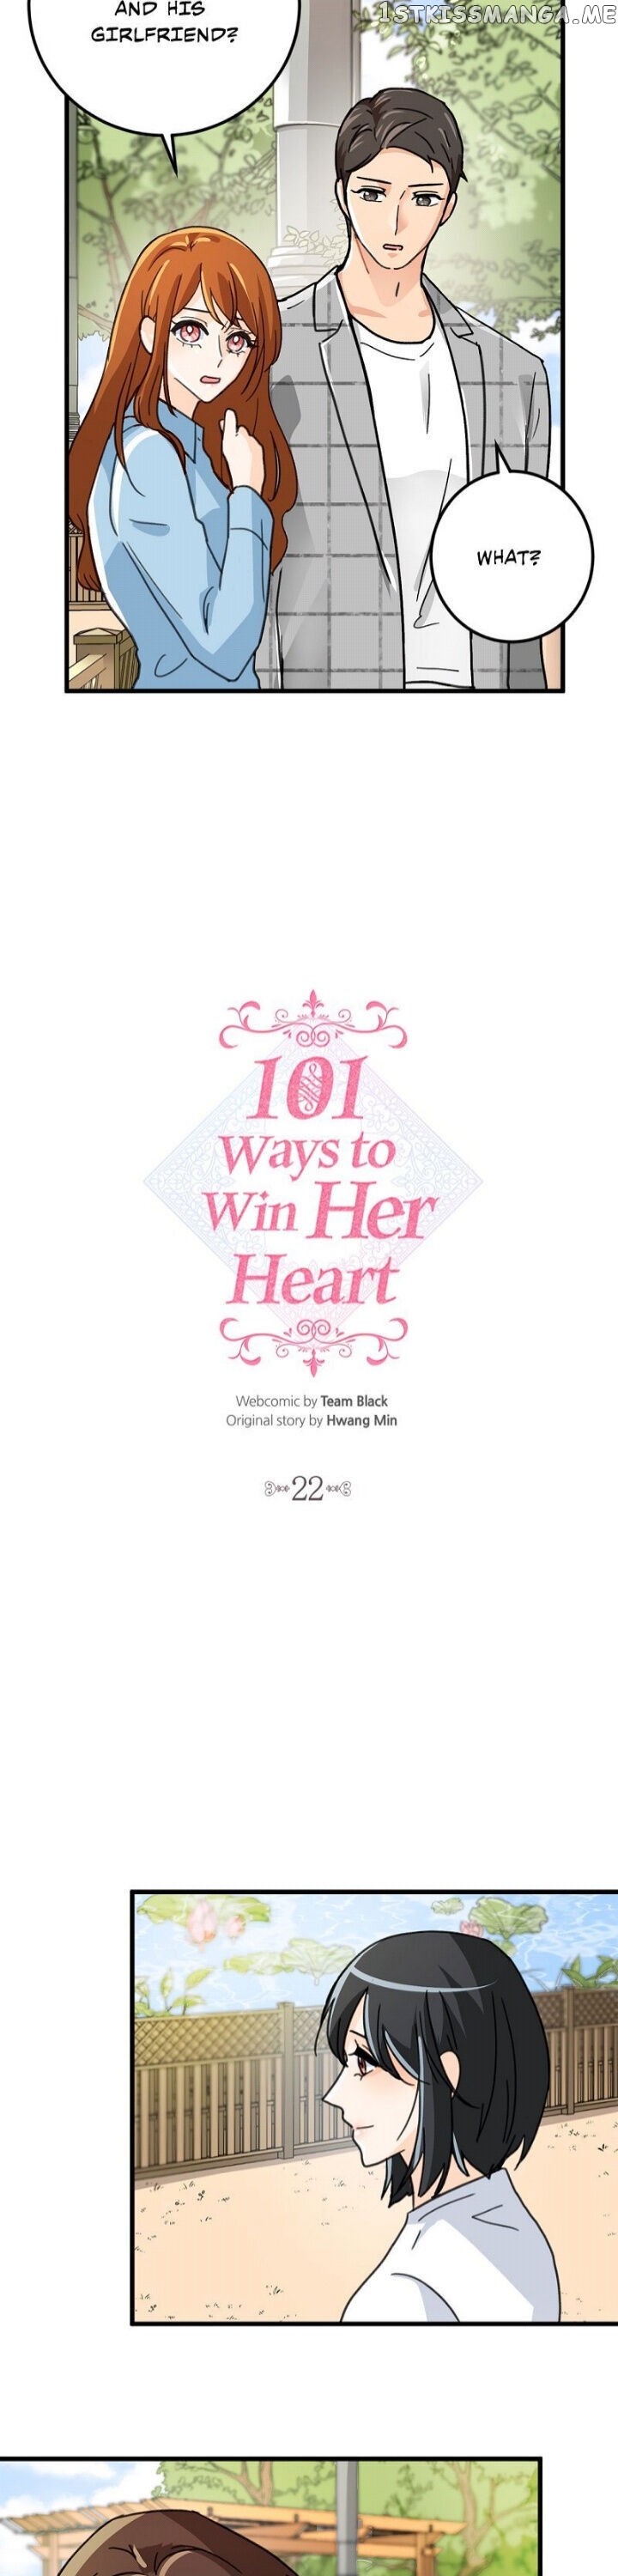 101 Ways to Win Her Heart chapter 22